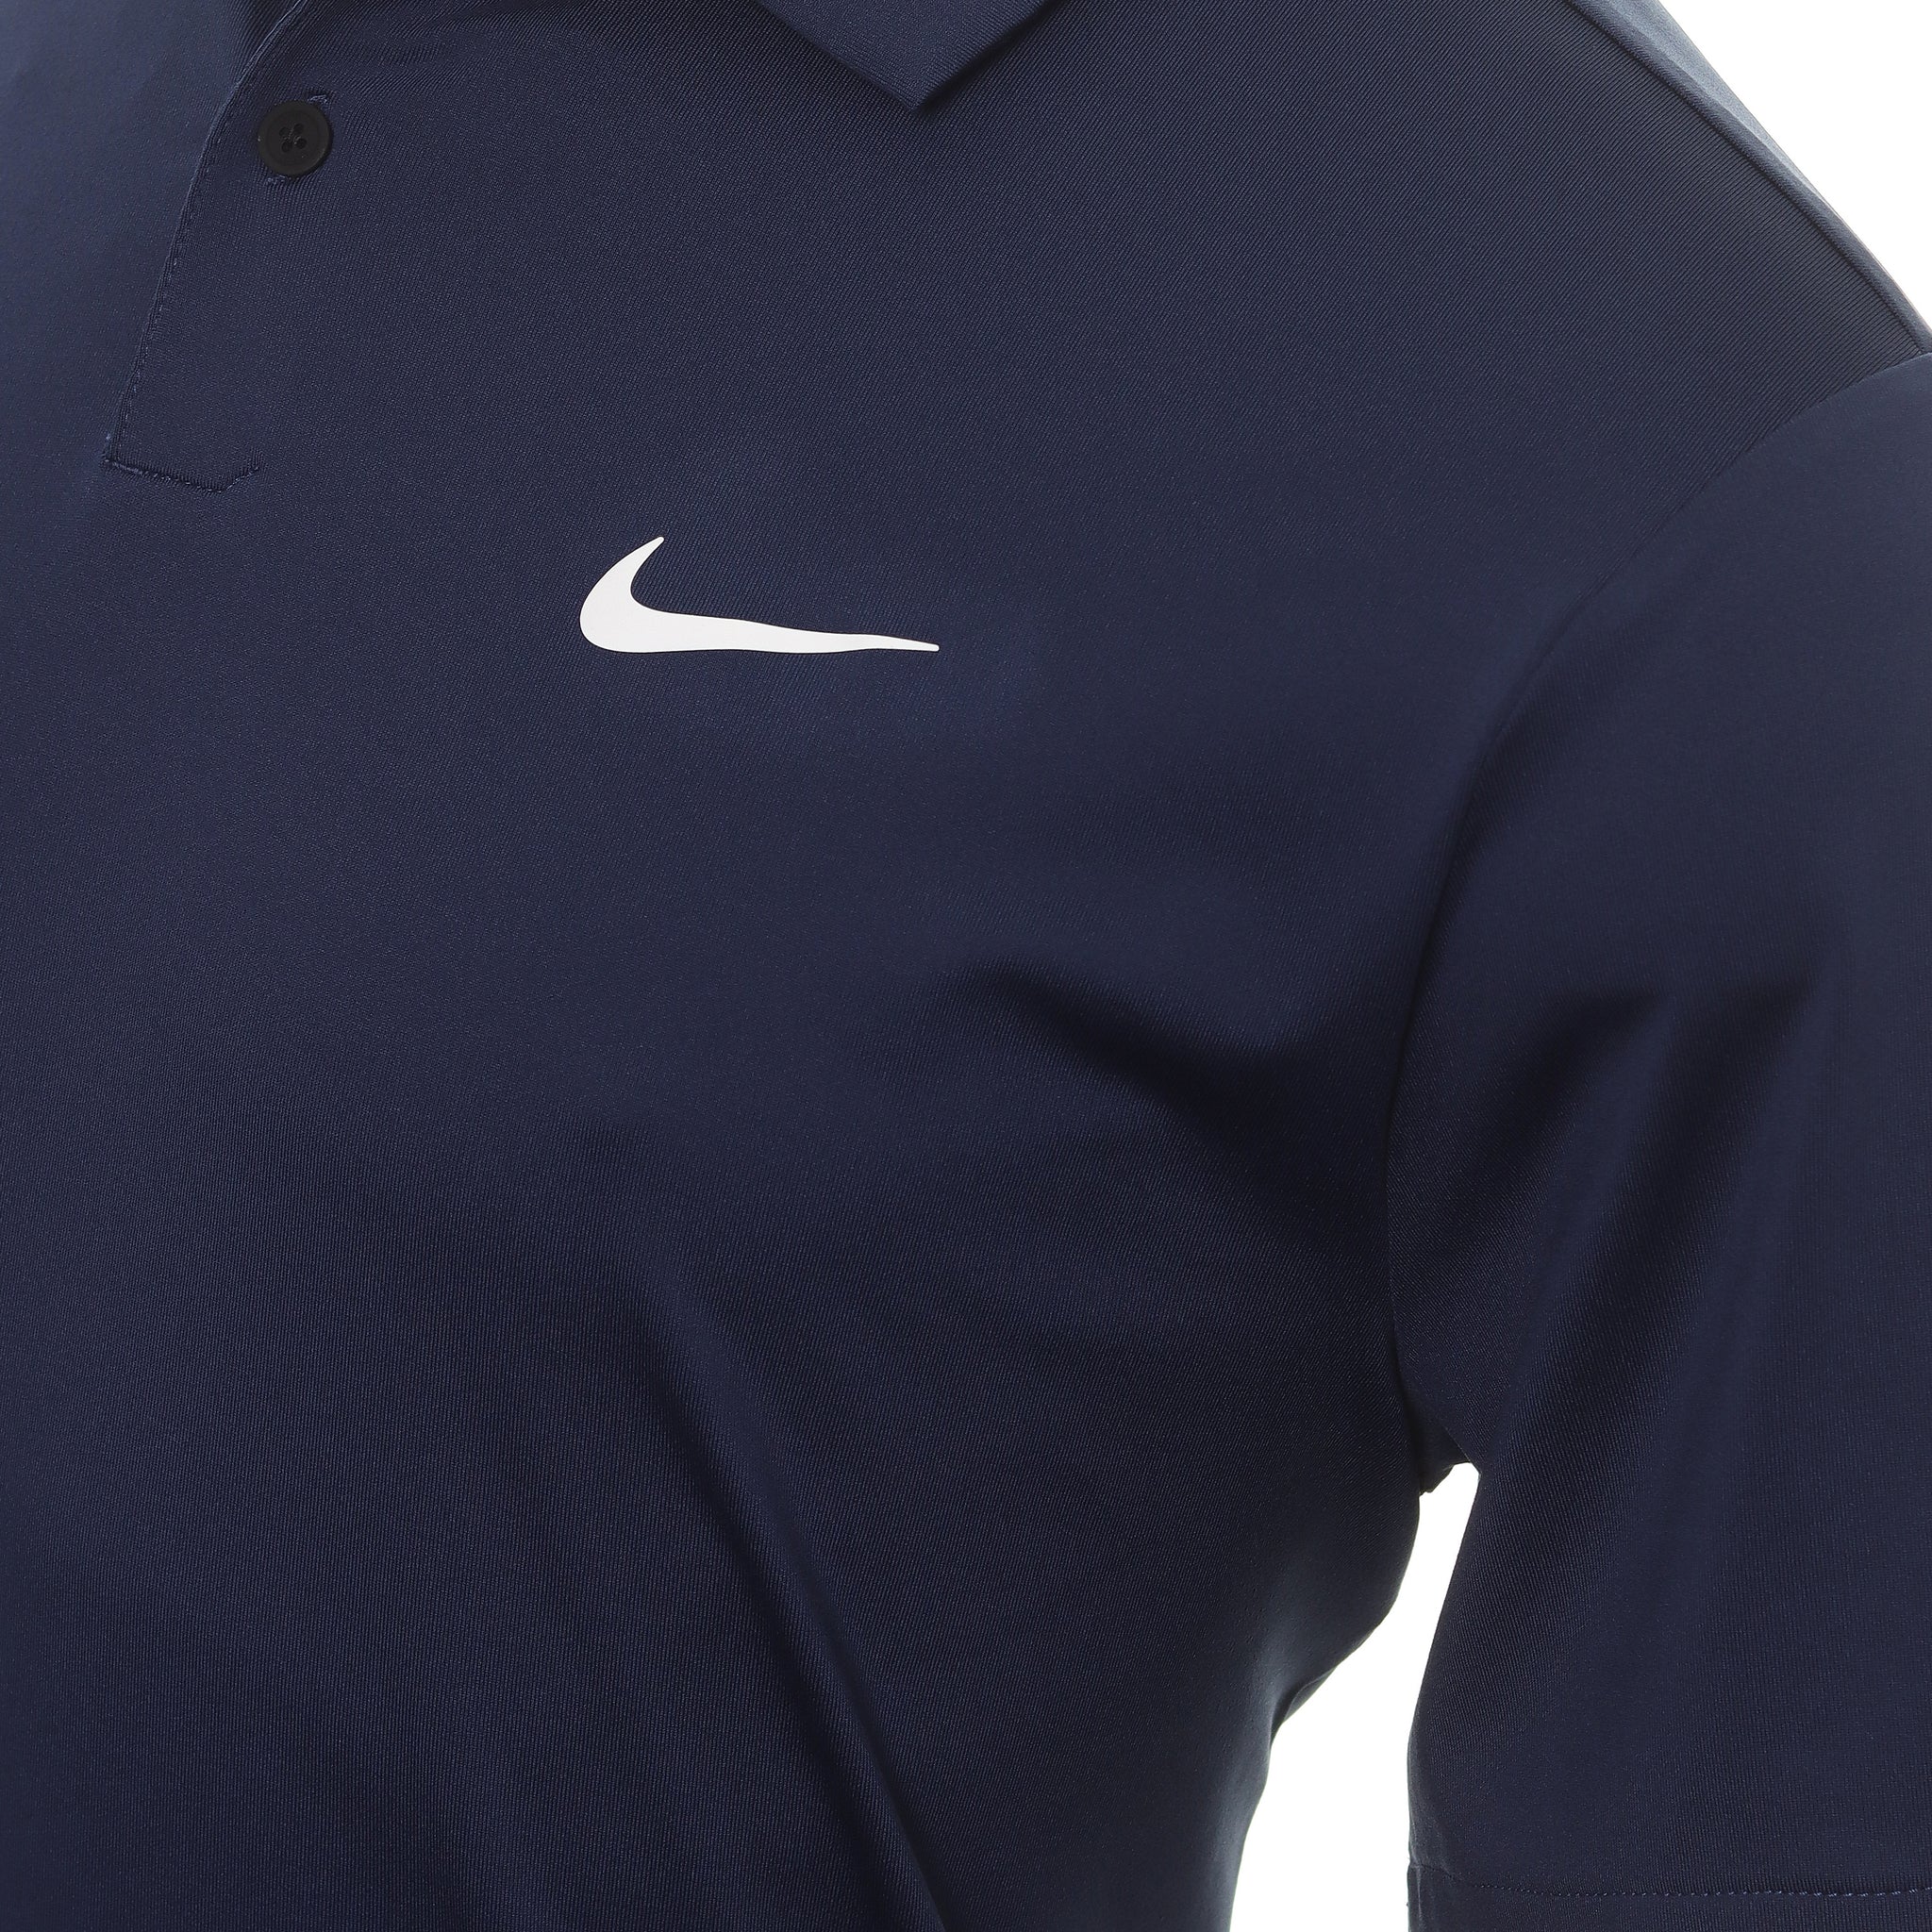 Nike Golf Dri-Fit Tour Solid Shirt DR5298 Midnight Navy 410 | Function18